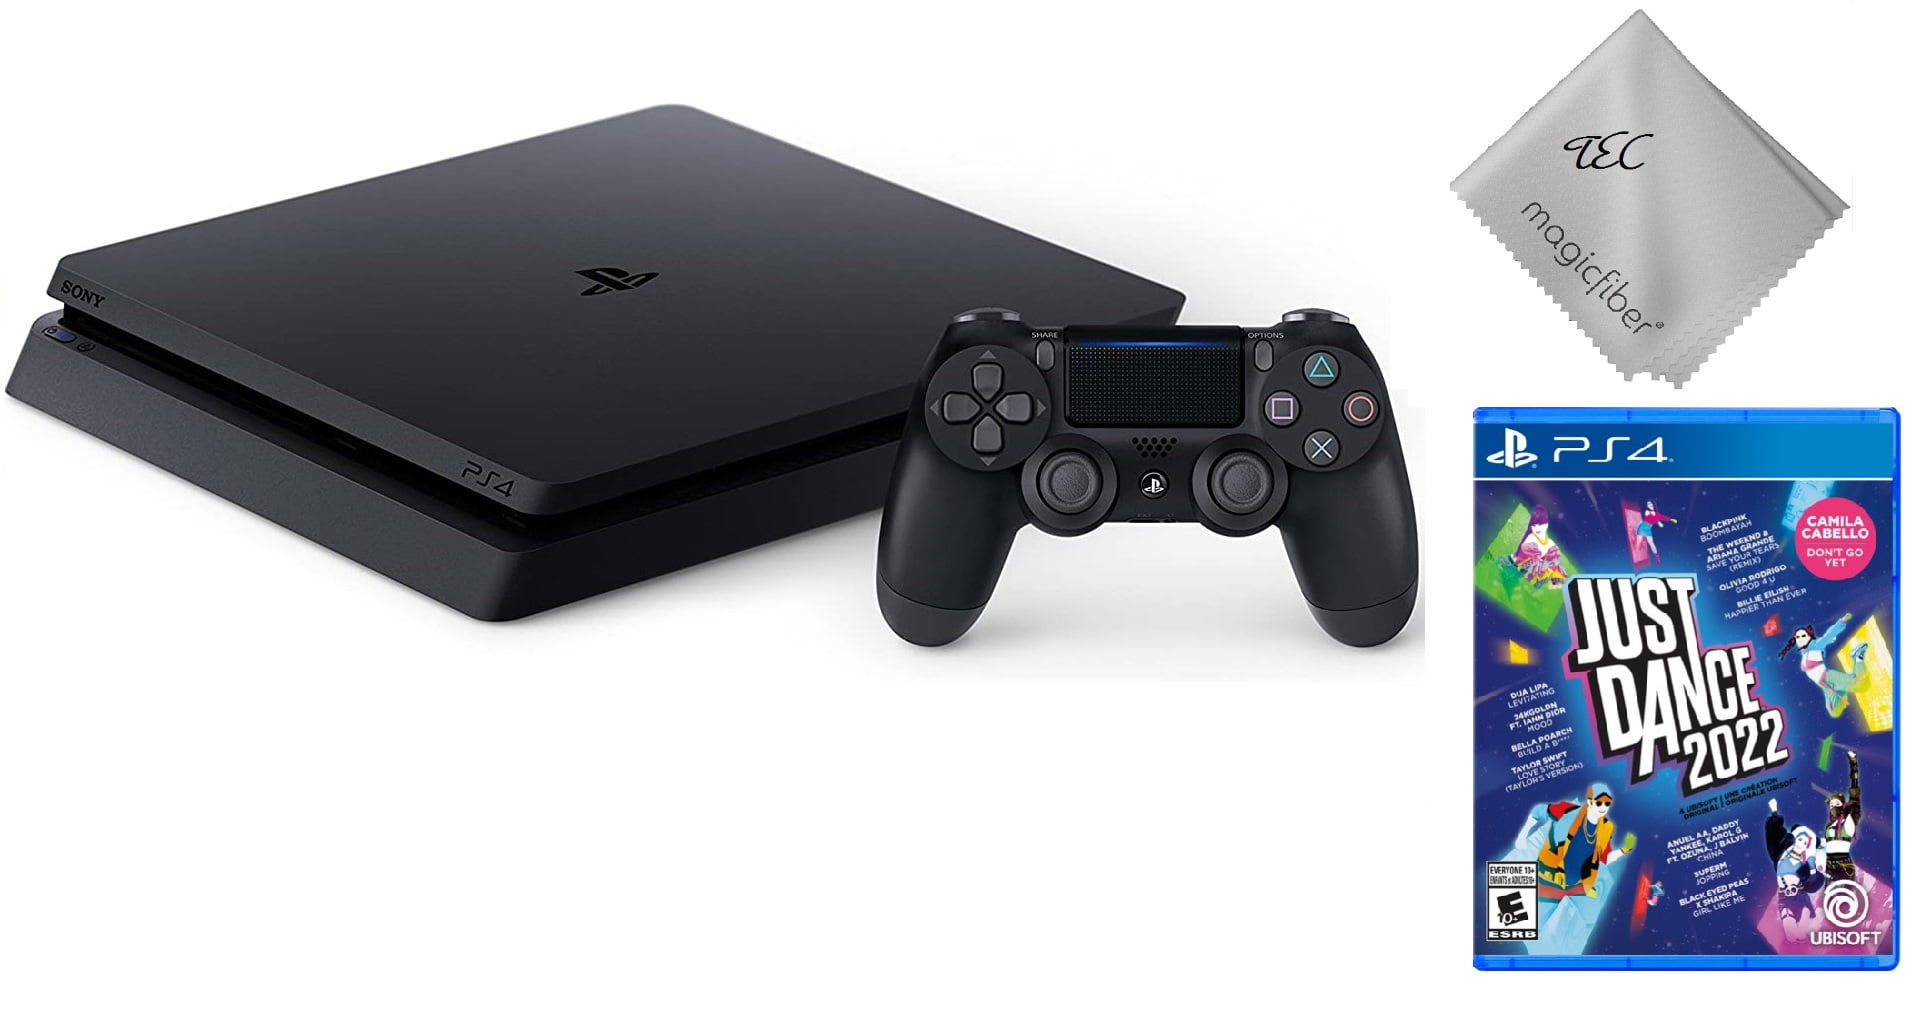 PS4 Slim 1TB console is on sale for $50 off on